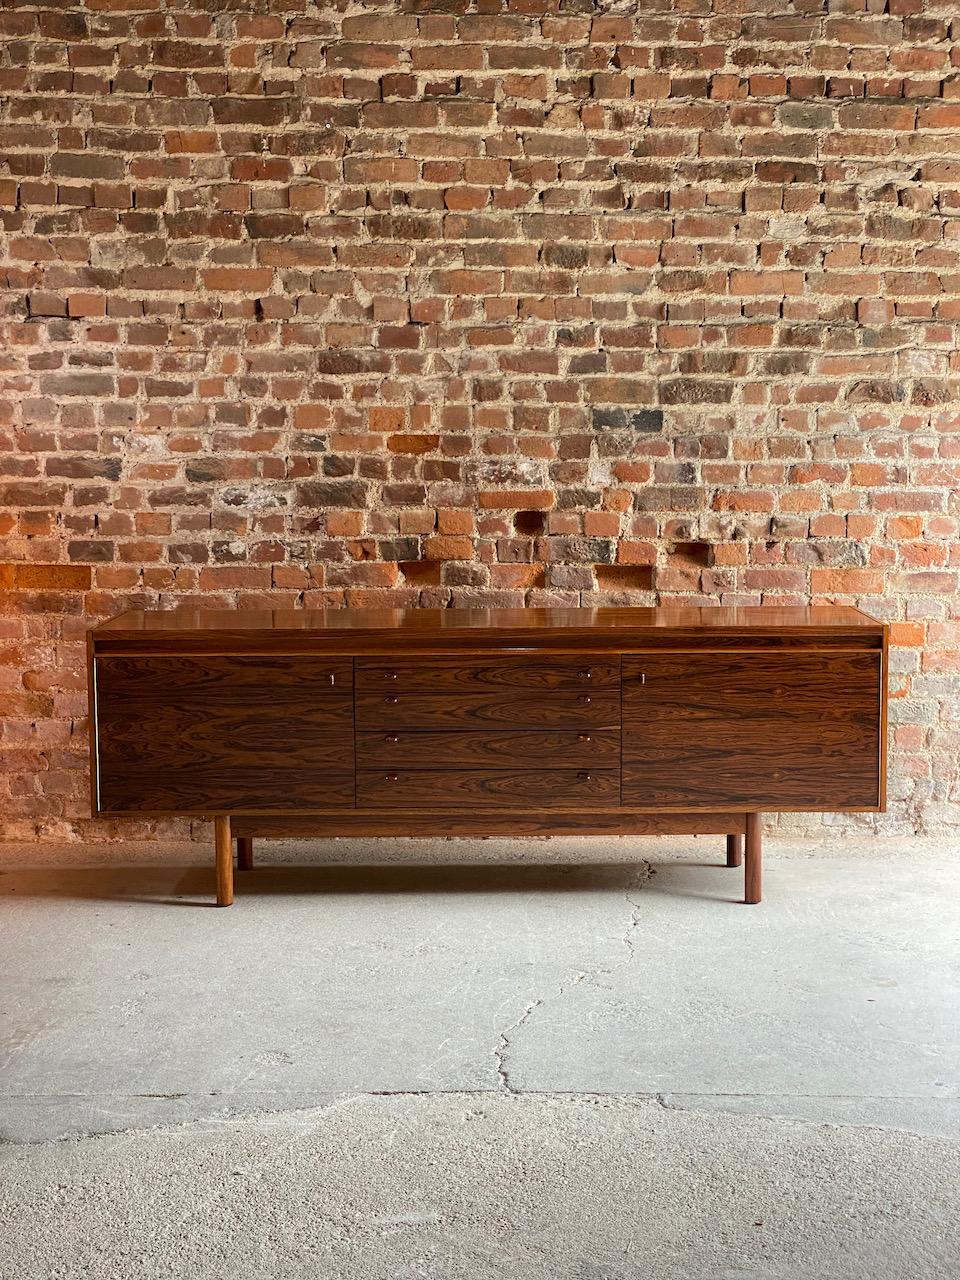 Robert Heritage Granville rosewood sideboard by Archie shine Circa 1969

Magnificent Robert Heritage Granville rosewood sideboard by Archie Shine circa 1969, this rare and highly sought after sideboard with its wonderful figured Brazilian rosewood